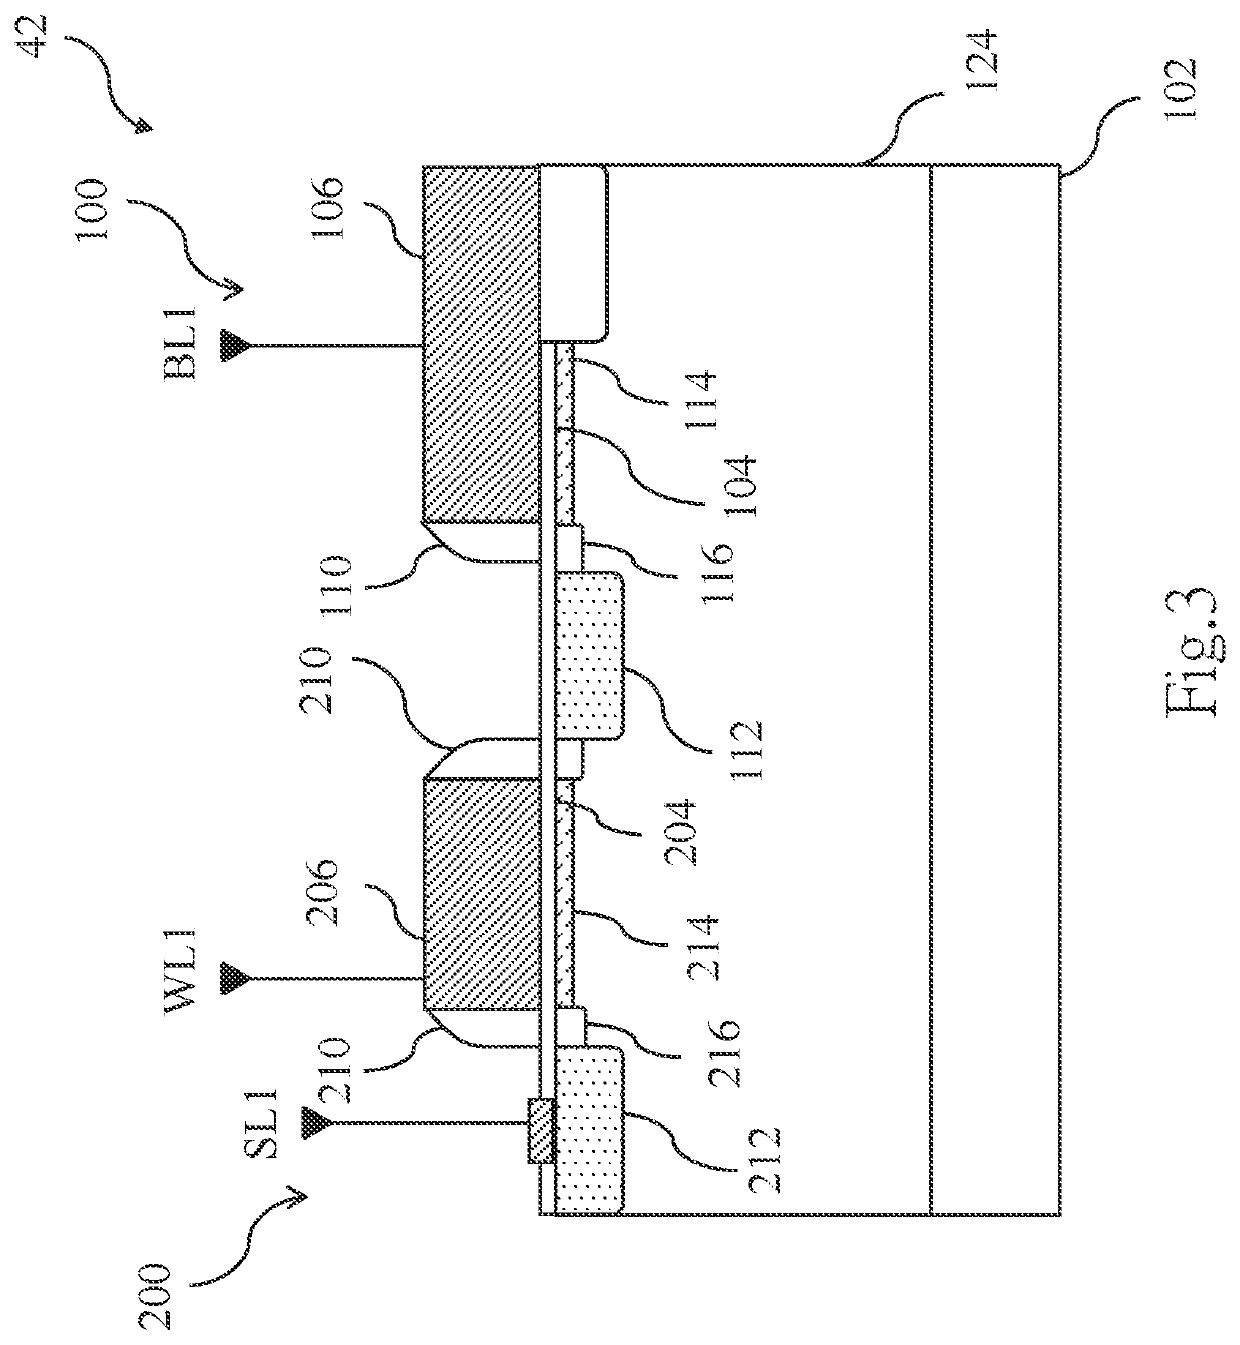 Small-area and low-voltage Anti-fuse element and array